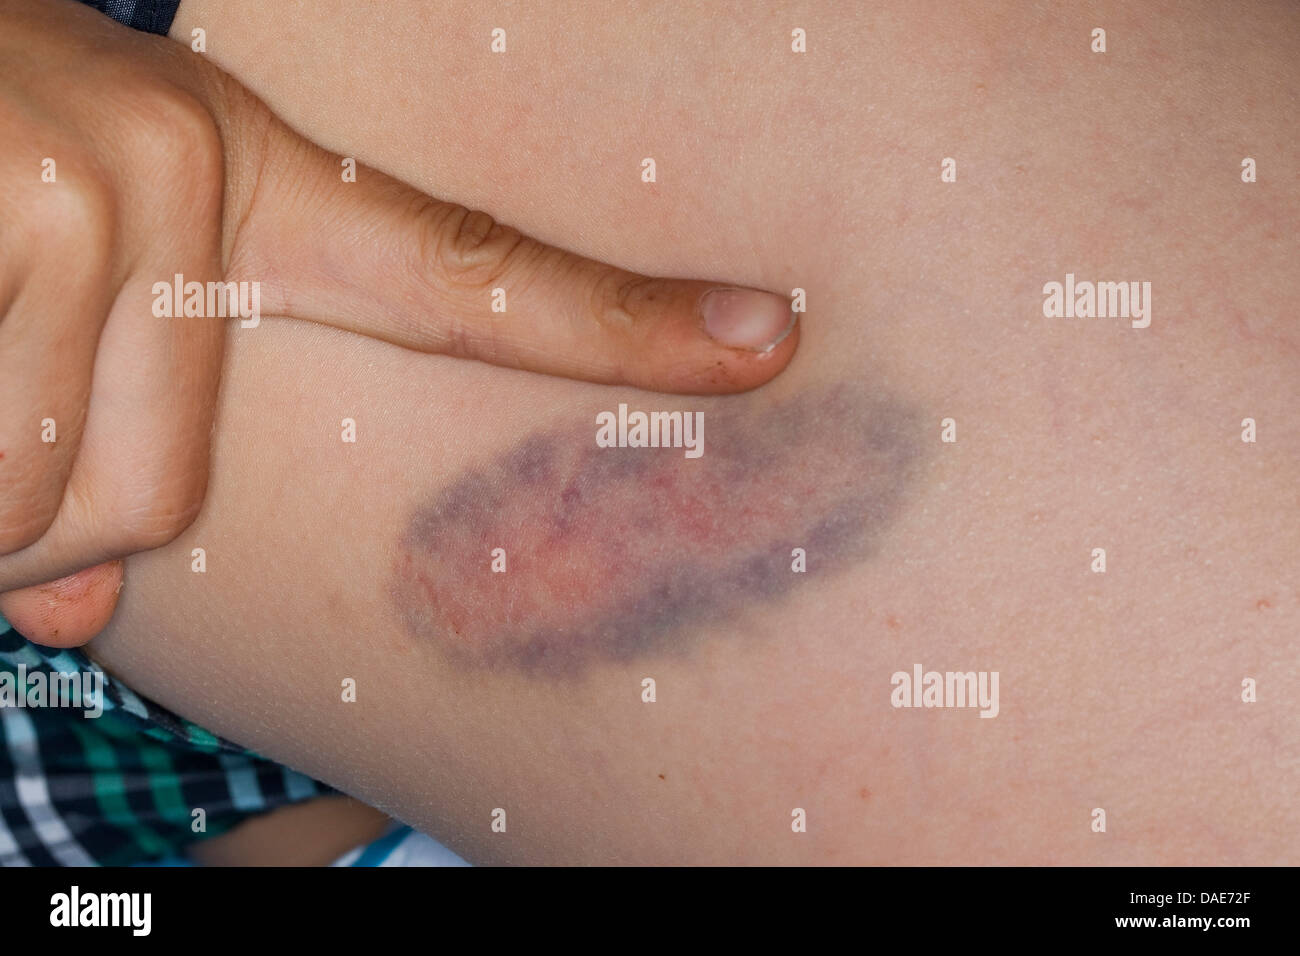 bruise at a leg, Germany Stock Photo